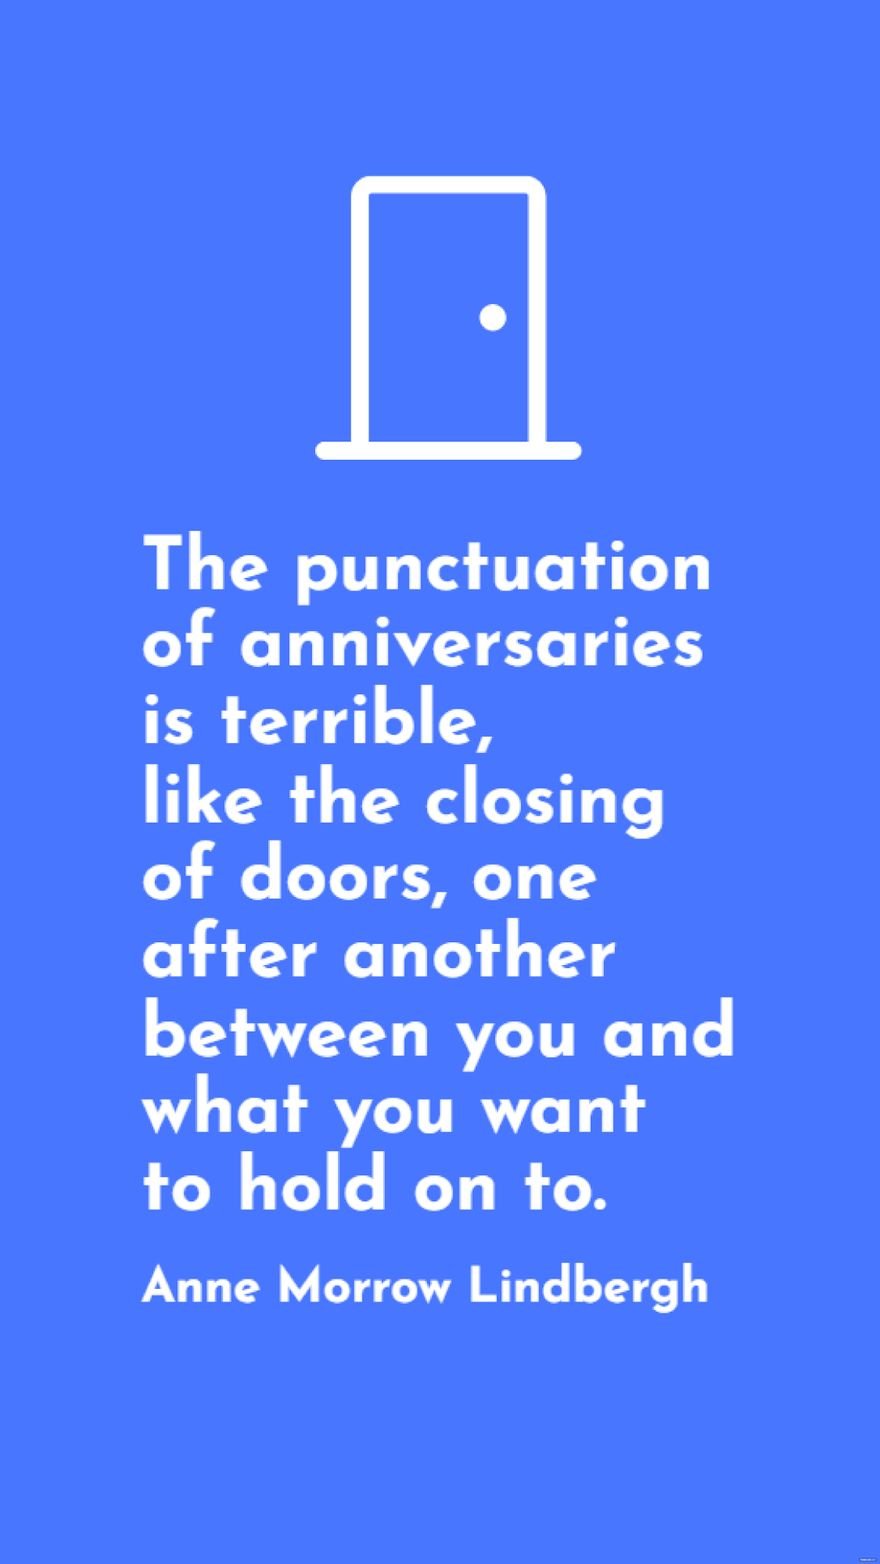 Anne Morrow Lindbergh - The punctuation of anniversaries is terrible, like the closing of doors, one after another between you and what you want to hold on to.